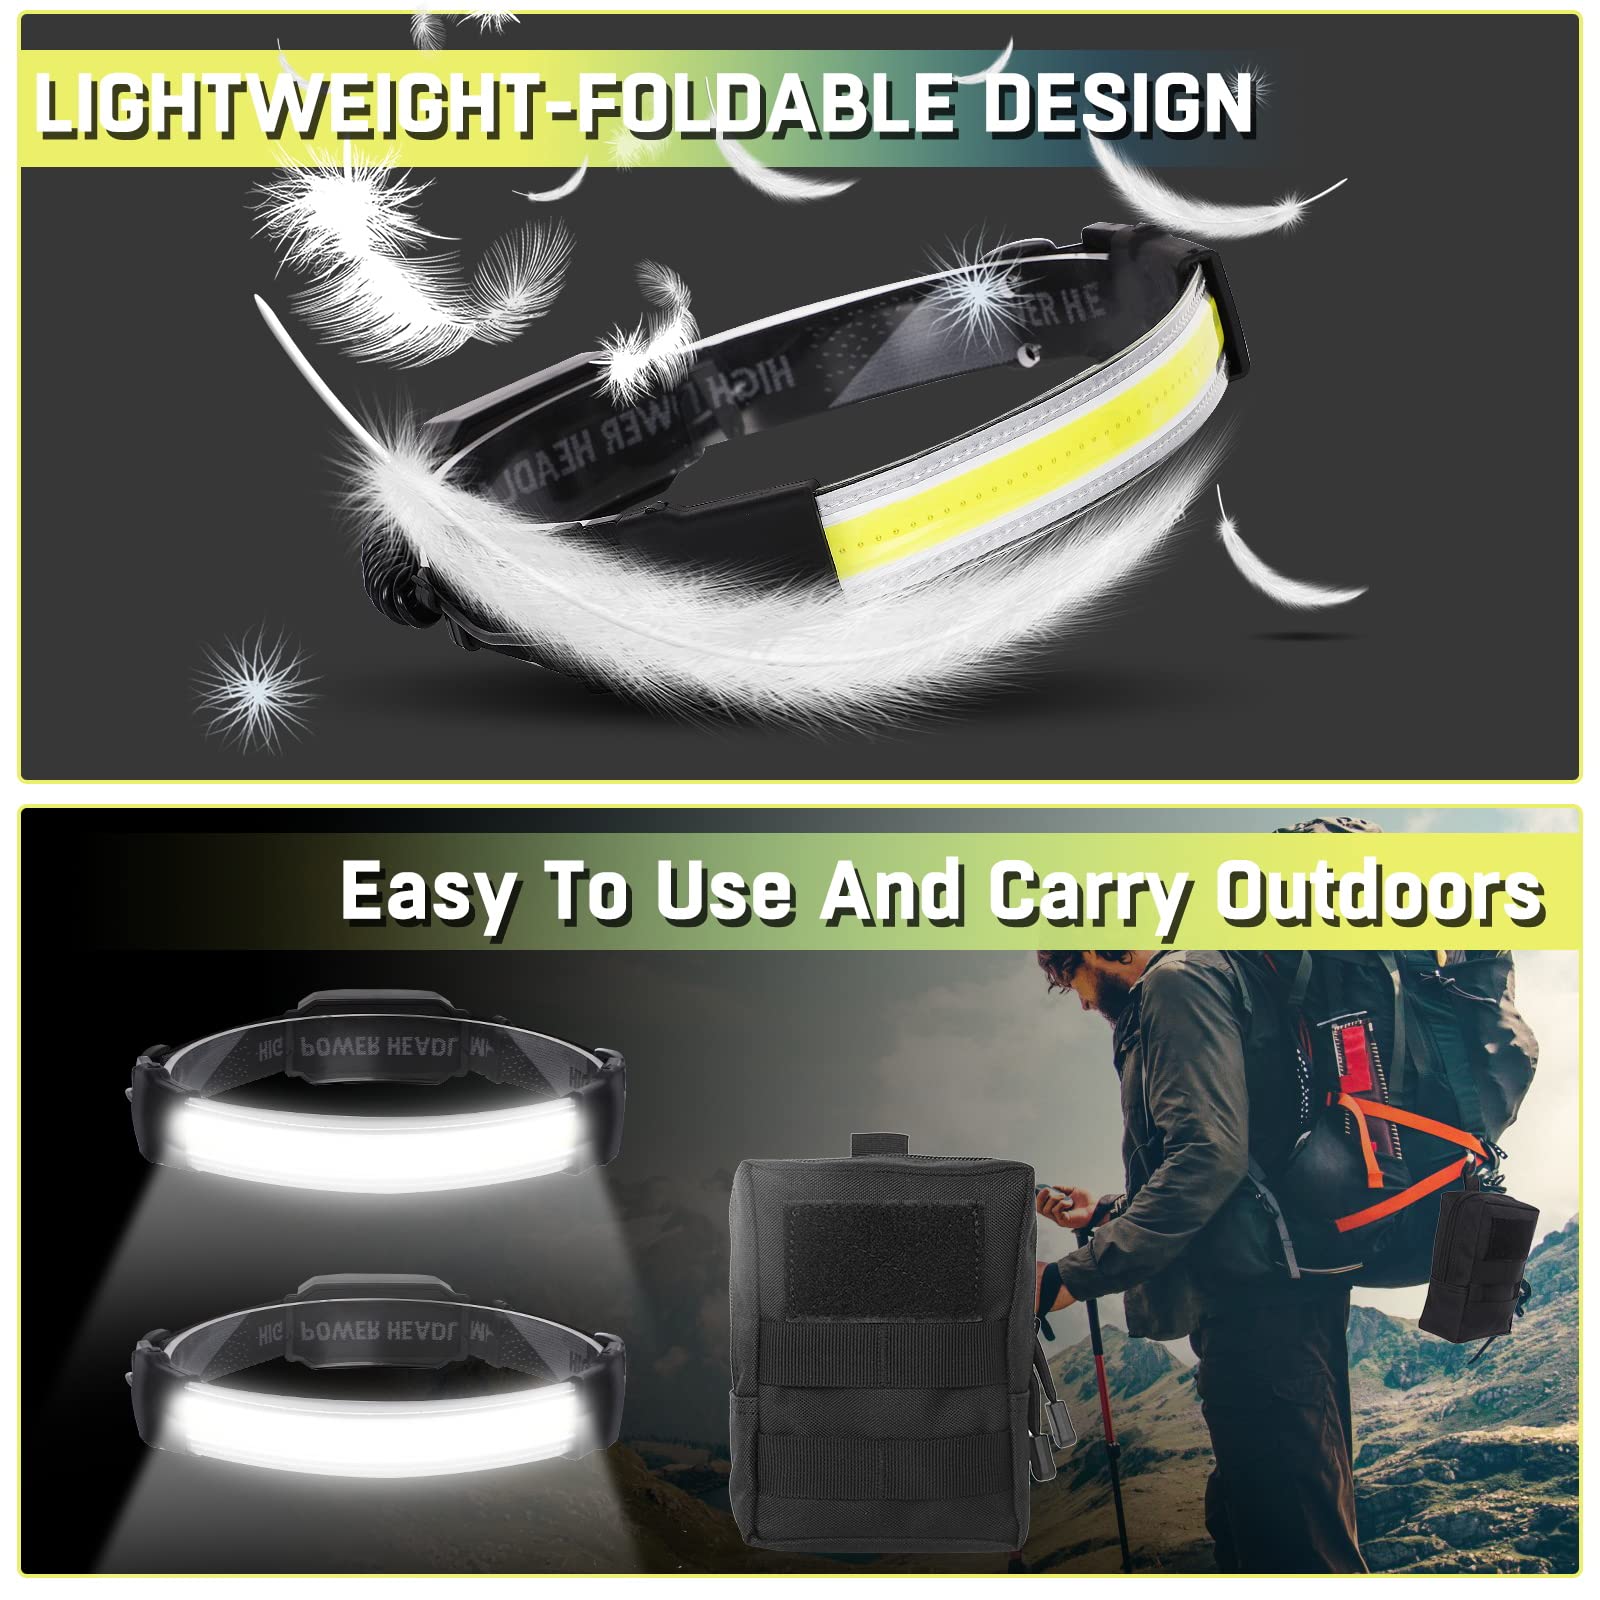 Headlamp Rechargeable,Ultra Bright Upgrade 1500 Lumens 6 Modes Head Lamp Led Rechargeable with Taillight(Individual Control),230°Wide Beam Waterproof Headlamps for Adults Outdoor Camping Running